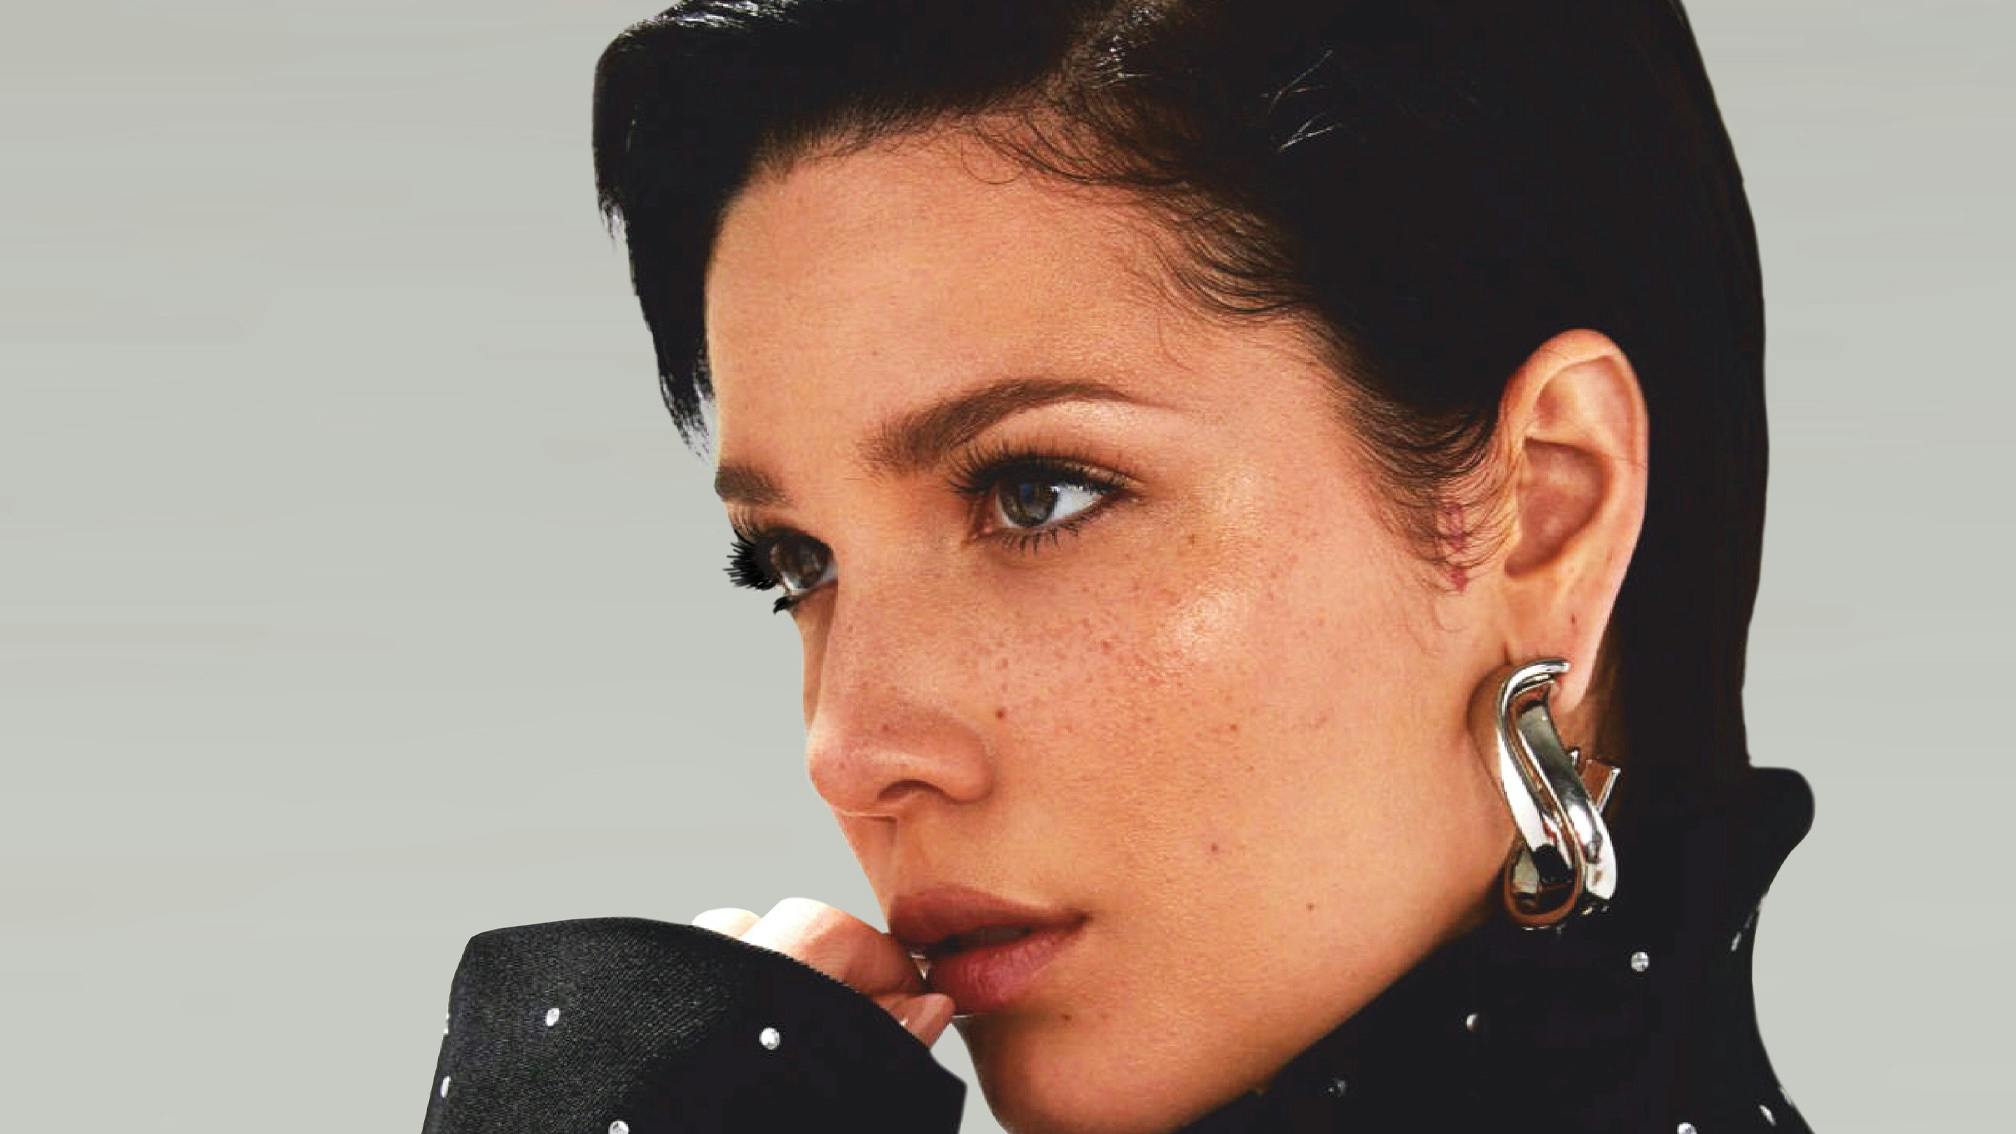 Halsey approaching new album with “no strict genre parameters”